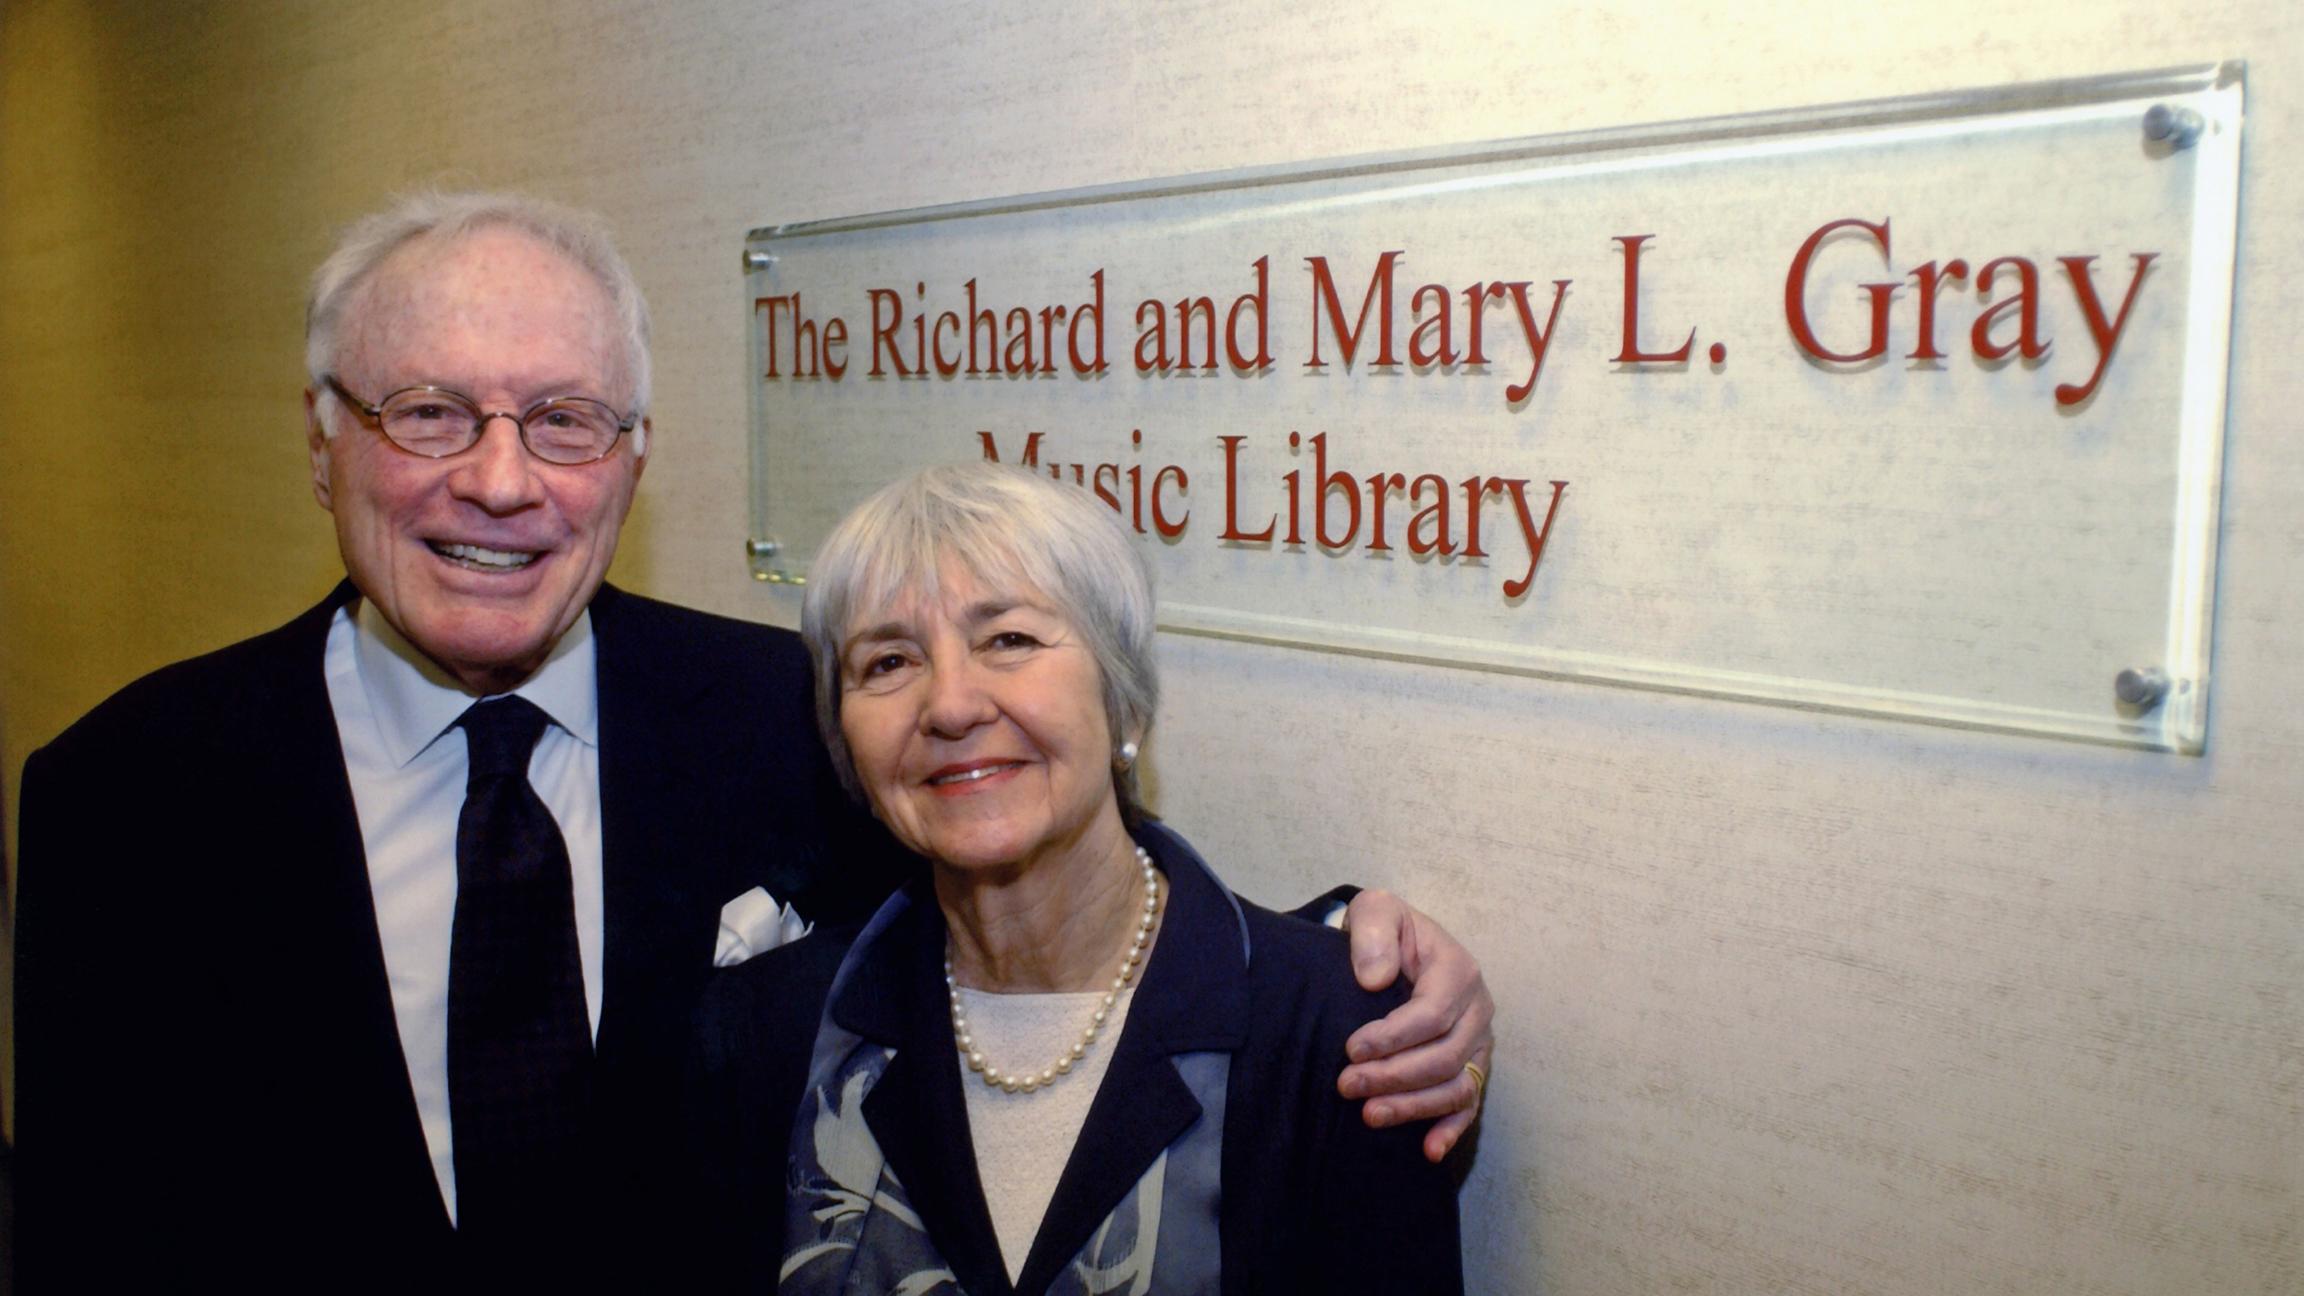 WFMT’s music library is named for Richard and Mary Gray.